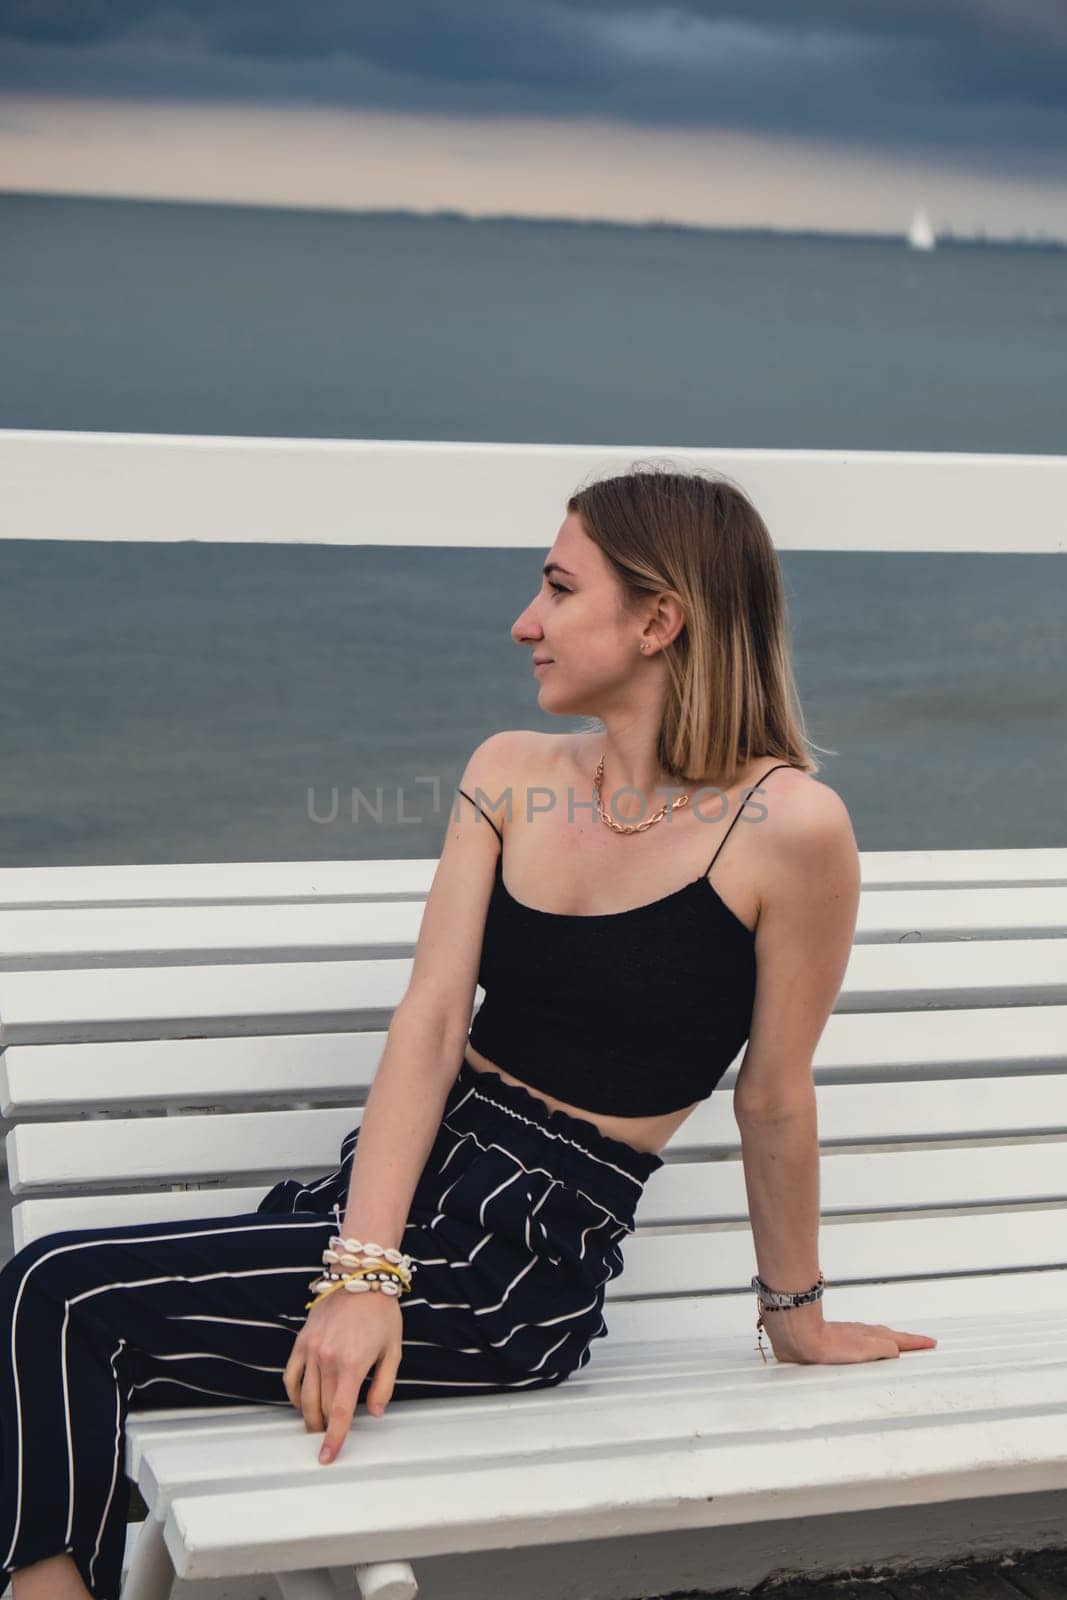 Young woman sitting on bench on wooden pier blurred beachside background. Attractive female enjoying the sea shore travel and active lifestyle concept. Springtime. Wellness wellbeing mental health inner peace Slow life digital detox